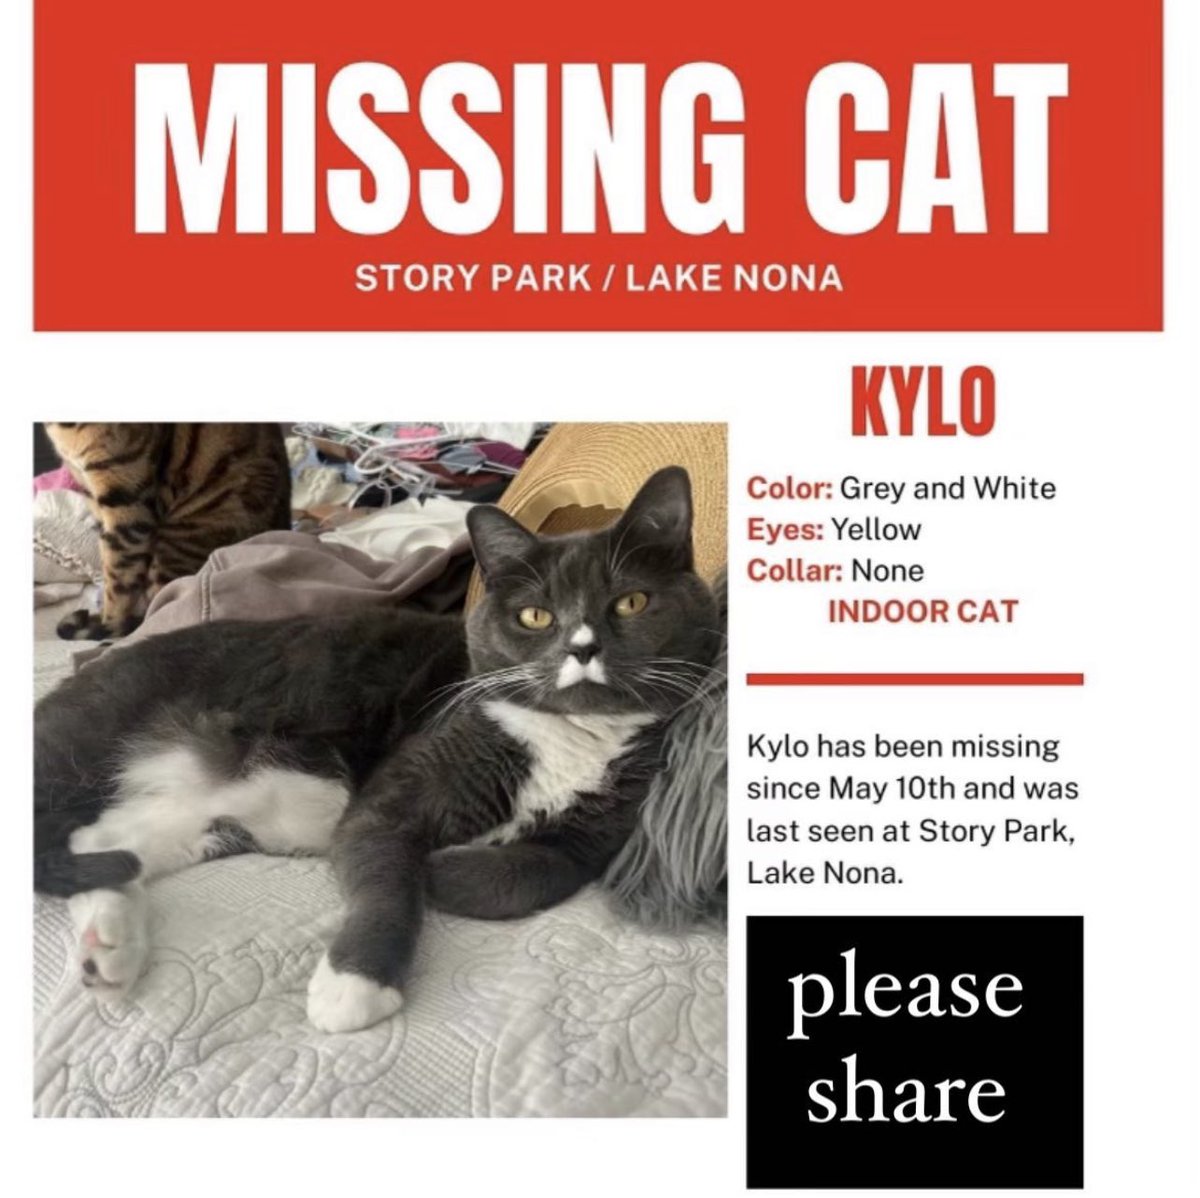 It’s a long shot but I have to try…

Our cat Kylo escaped a few days ago. We live near Lake Nona in Orlando, FL.